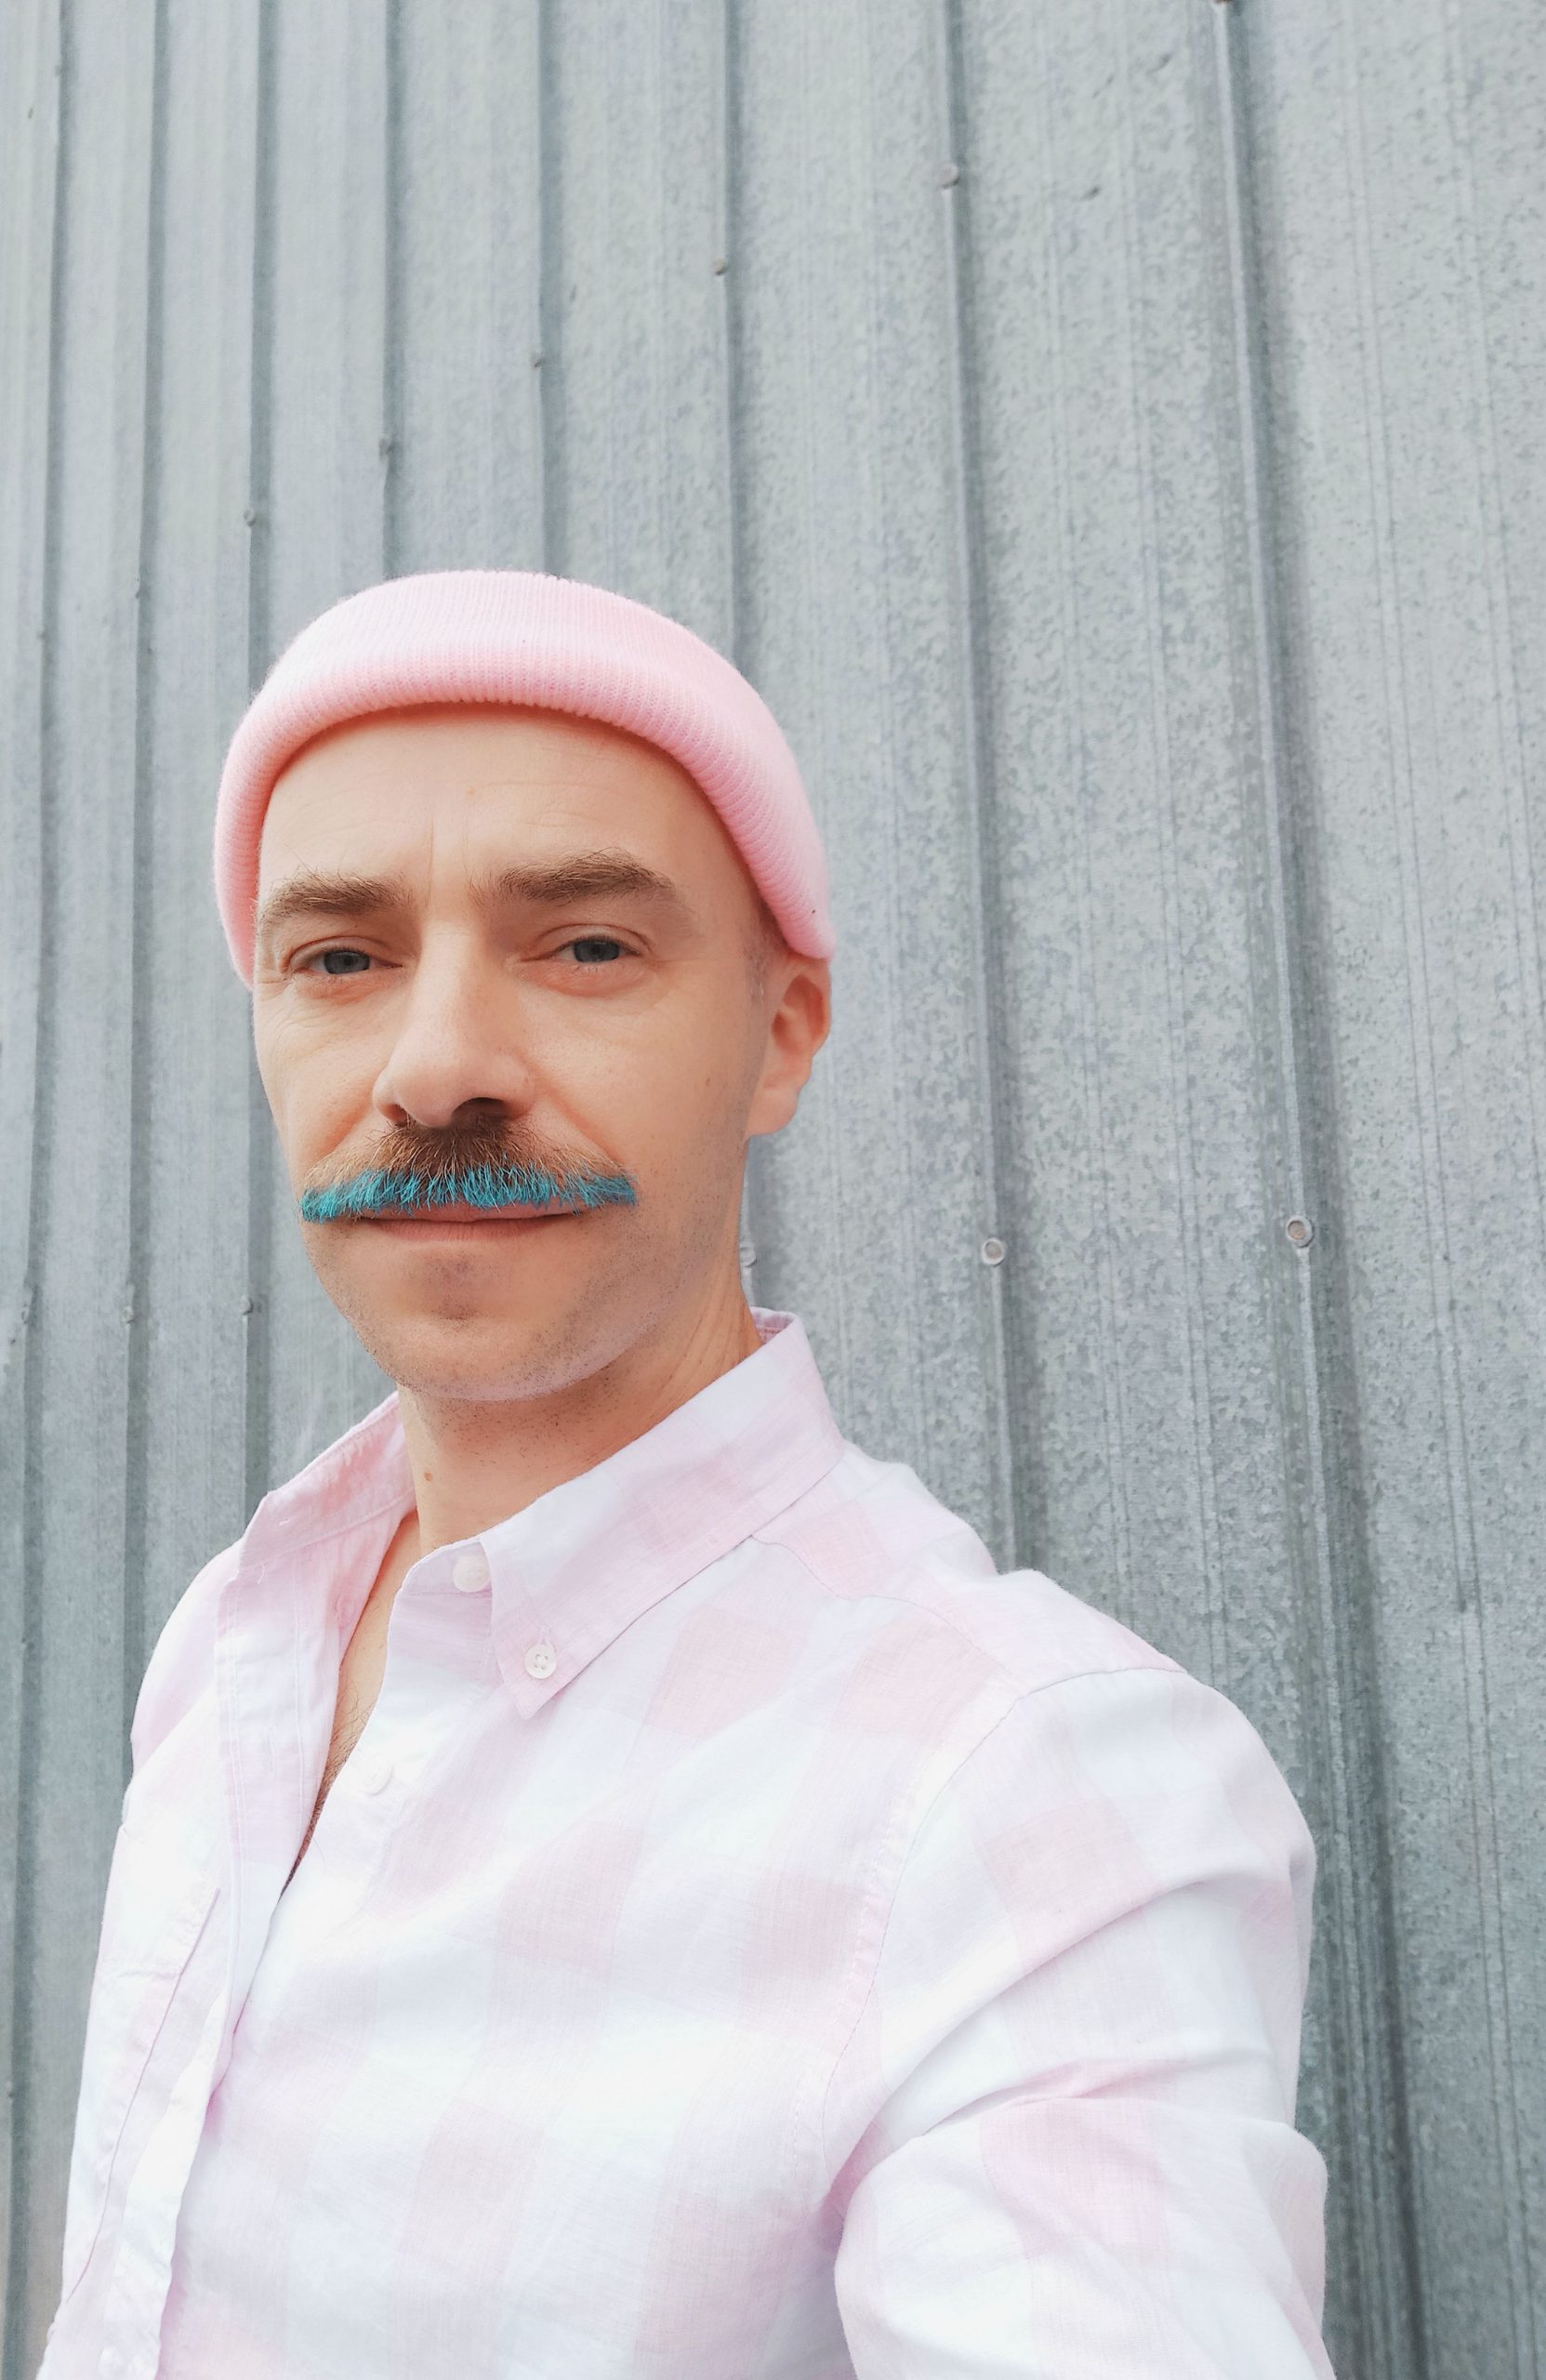 Richie Eilcox stands in front of a grey cement wall, looking directly into the camera. They are picnture from the shoulders up, wearing a pale pink button-down shirt and pink beanie. The lower part of their moustache is bright blue, and they are half-smiling as they look at the viewer.